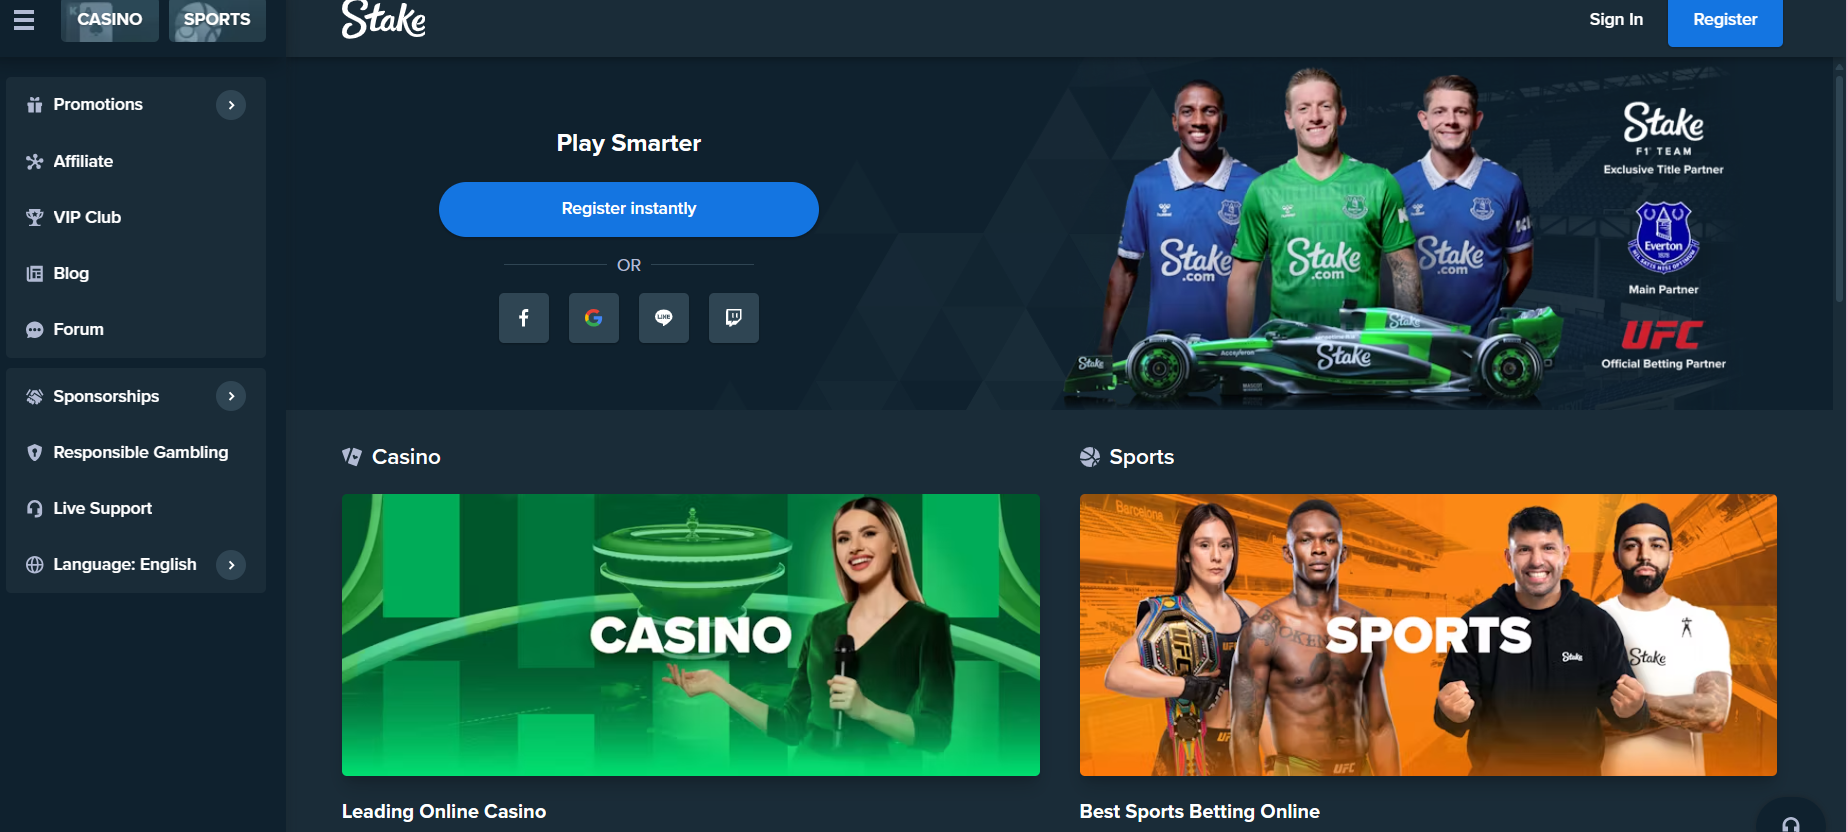 Stake Casino review